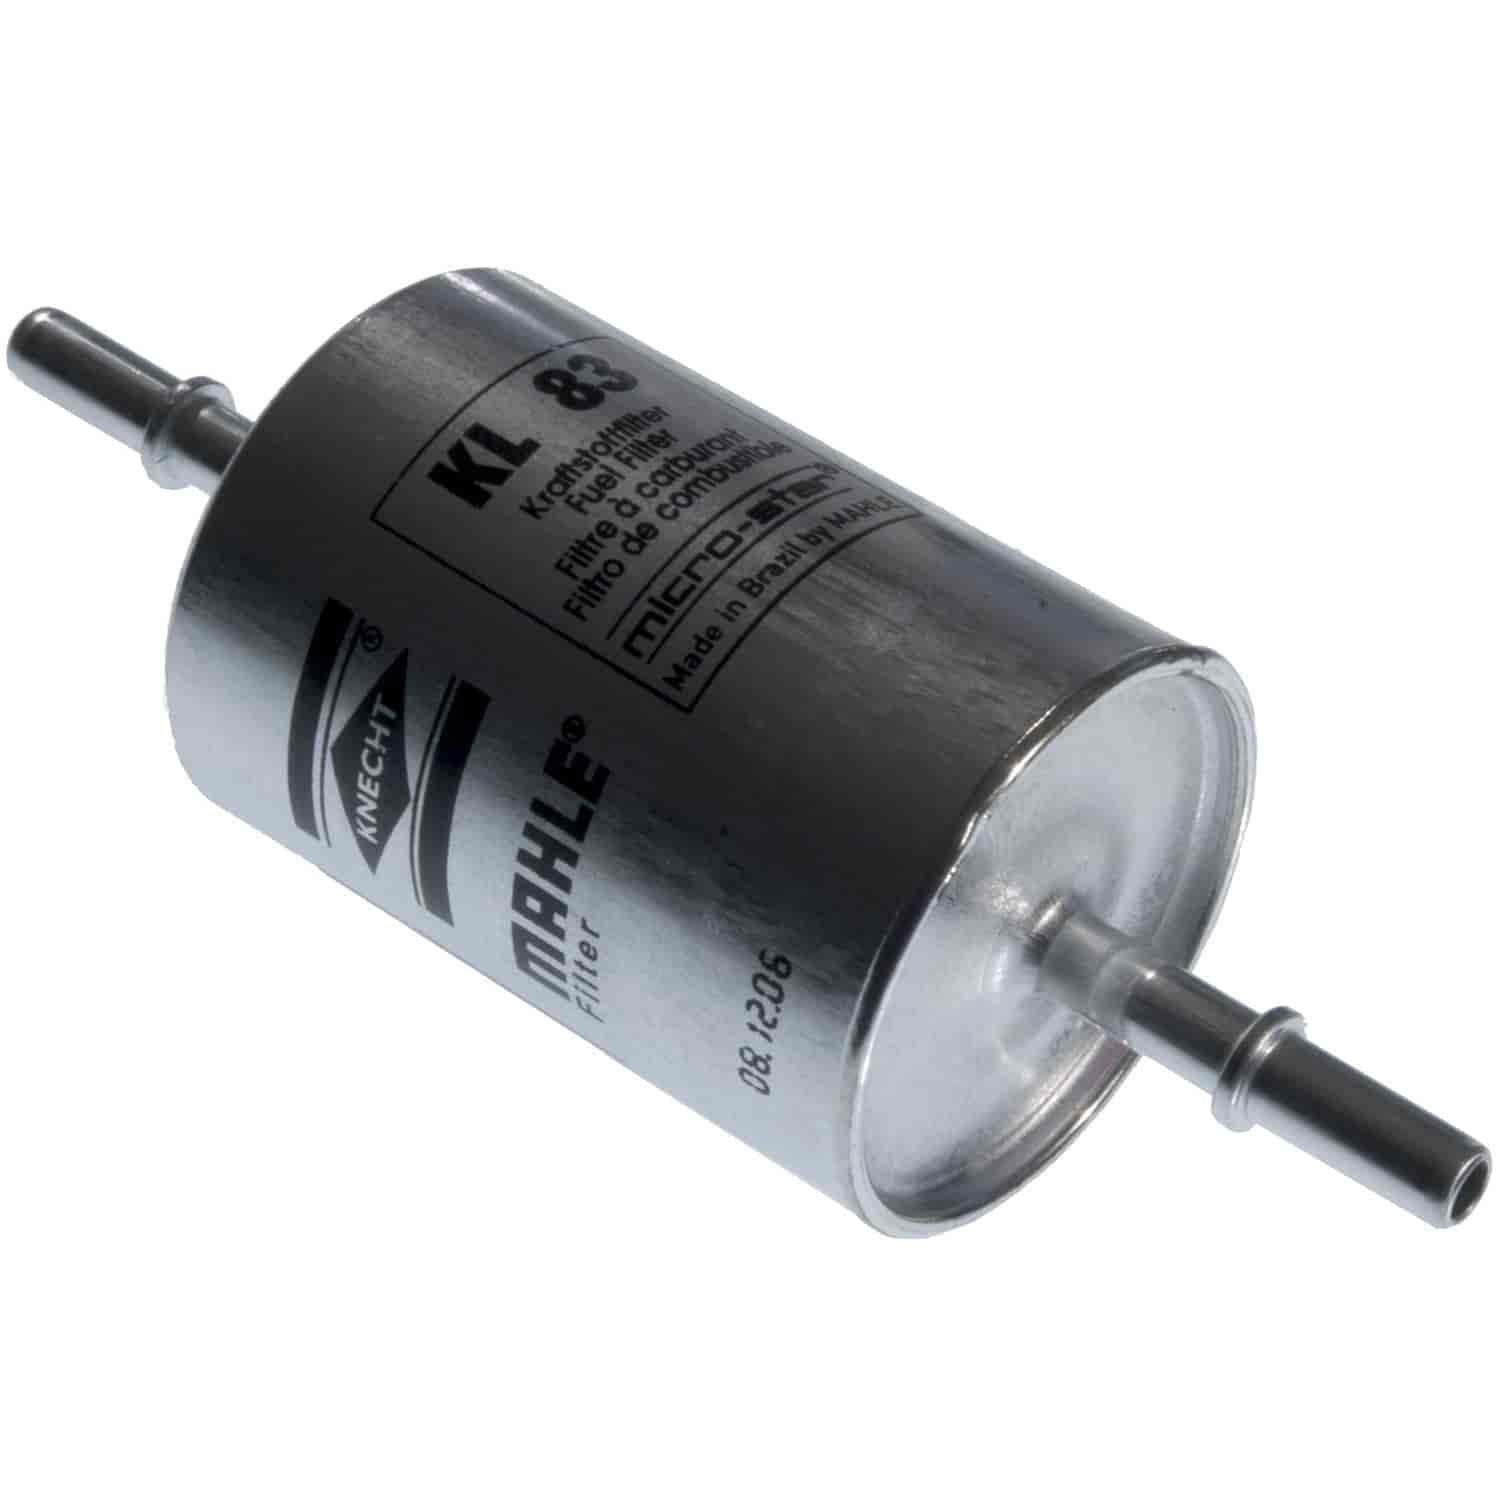 Mahle Fuel Filter Saab 9-3 2004-2007 9-5 from